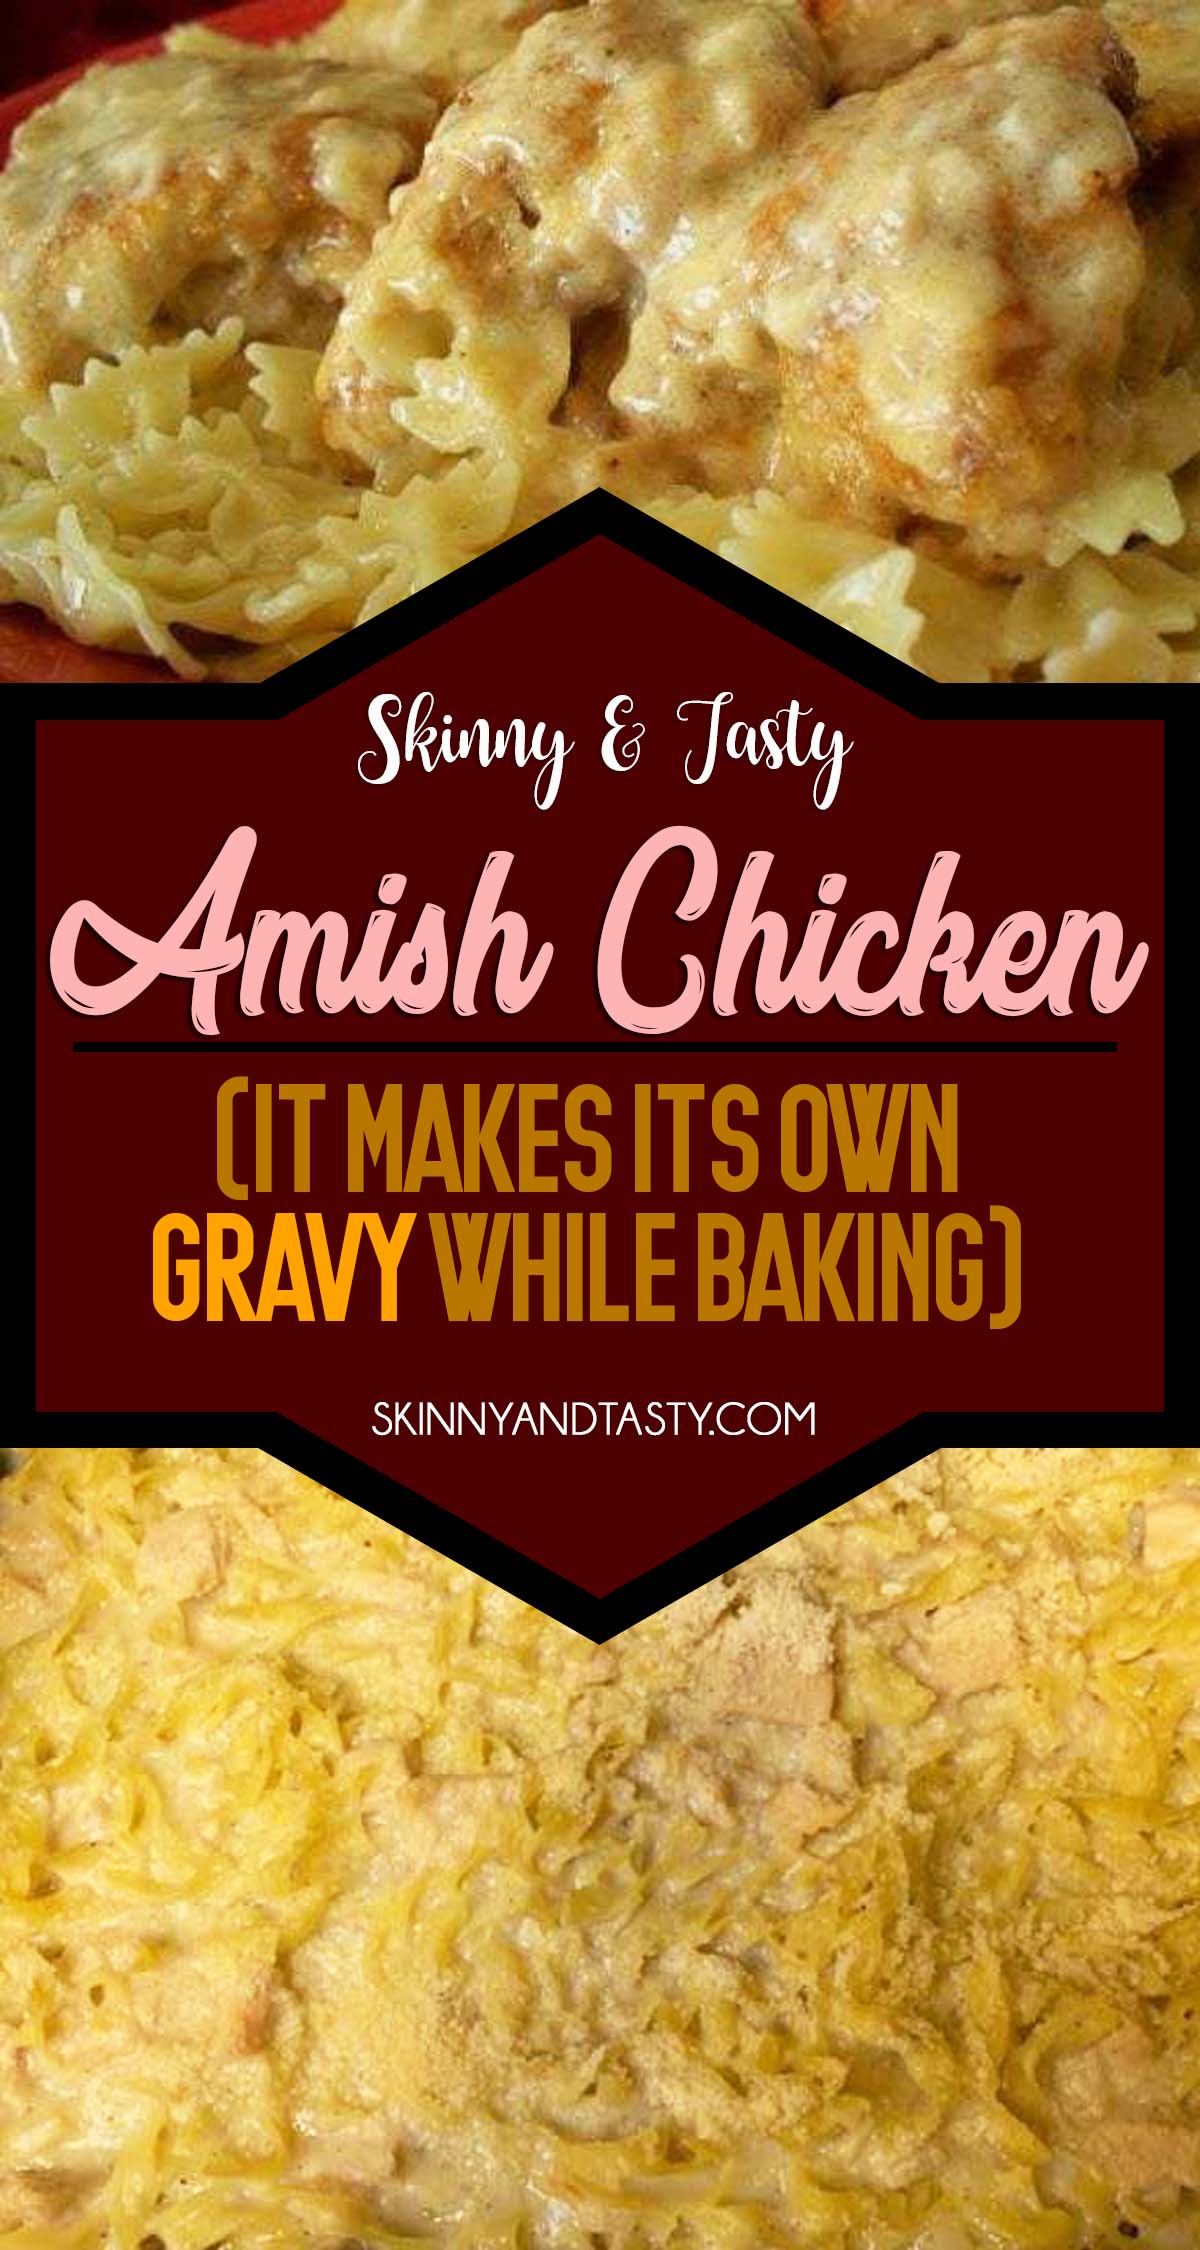 The Secret [Amish Chicken It Makes Its Own Gravy While Baking](url)